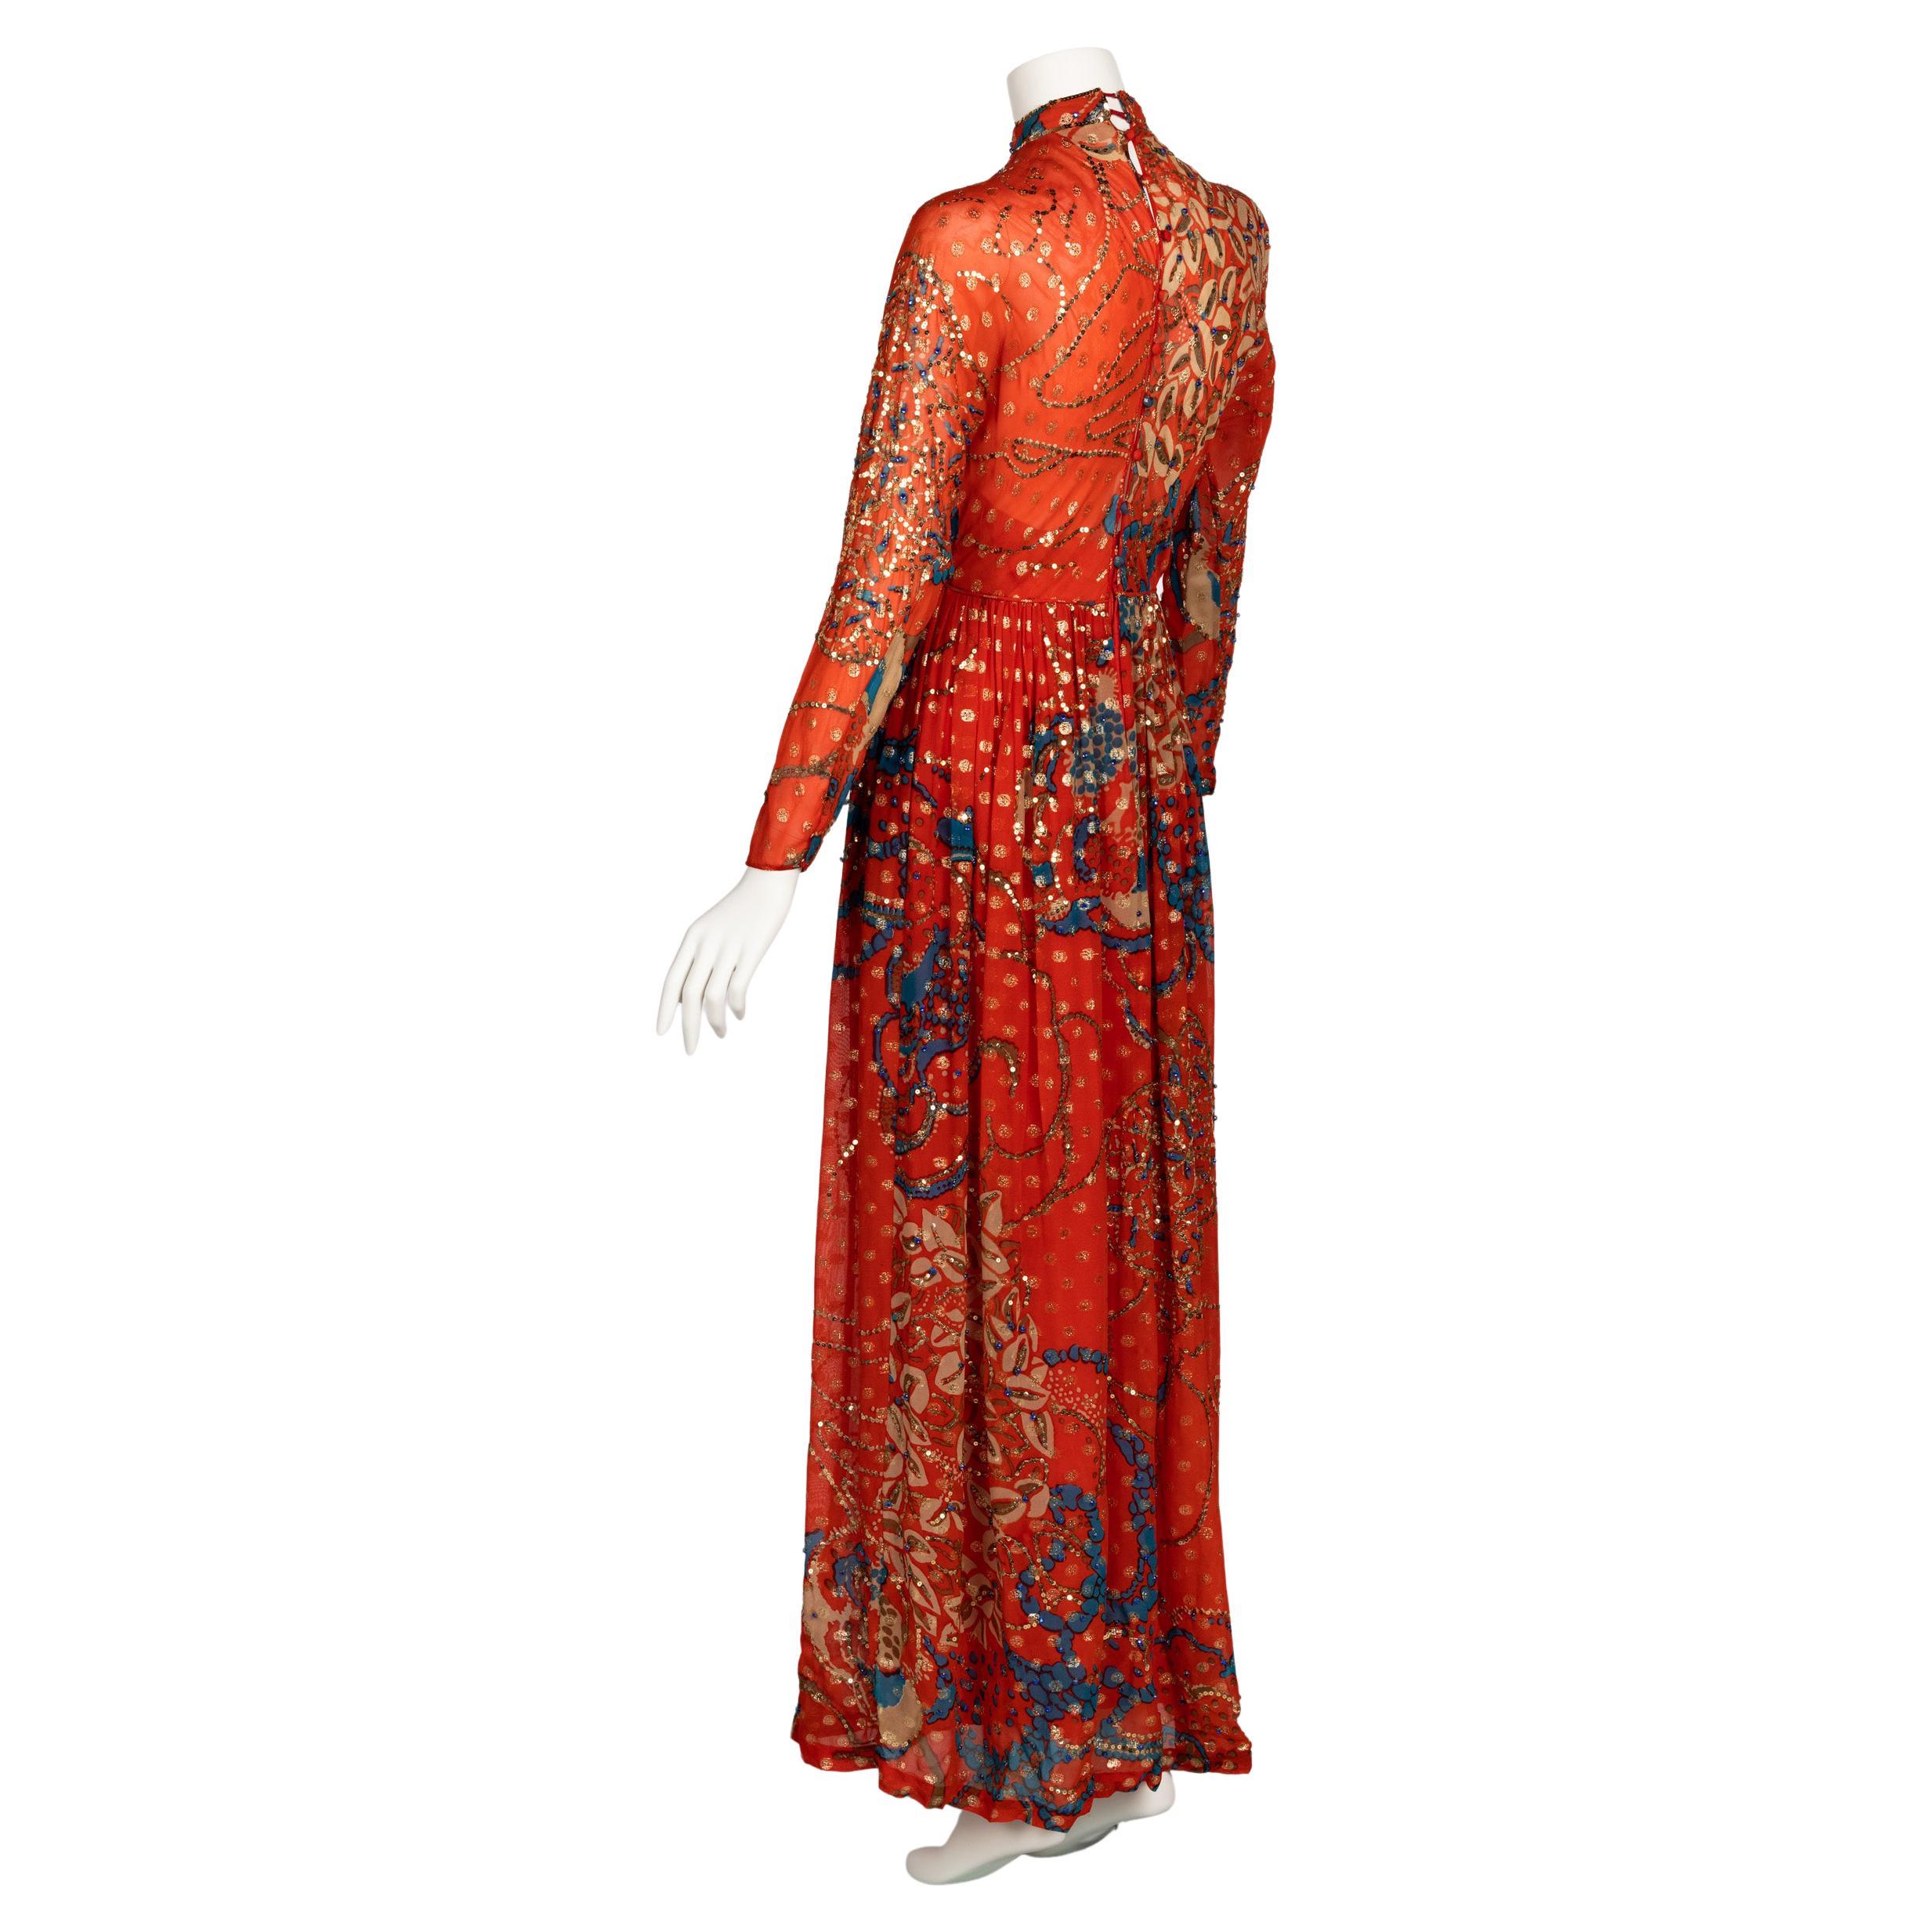 Malcolm Starr Rizkallah Sequined Gold Beaded Red Maxi Dress 1970s For Sale 2